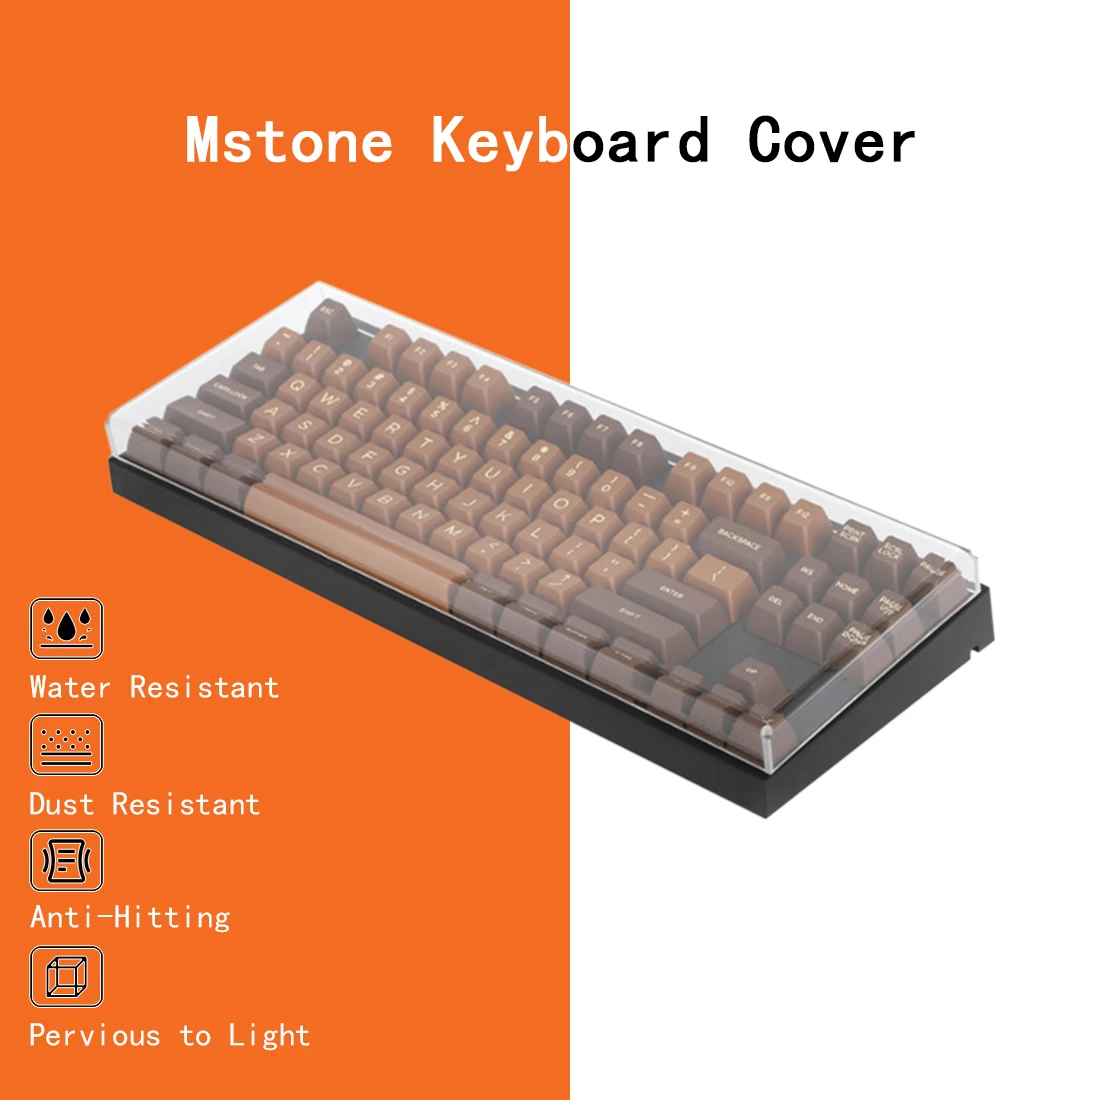 Mstone Clear Acrylic Mechanical Keyboard Cover with Cute Cat Pattern to Block Dust, Liquid, Falling Objects and Pet Scratches